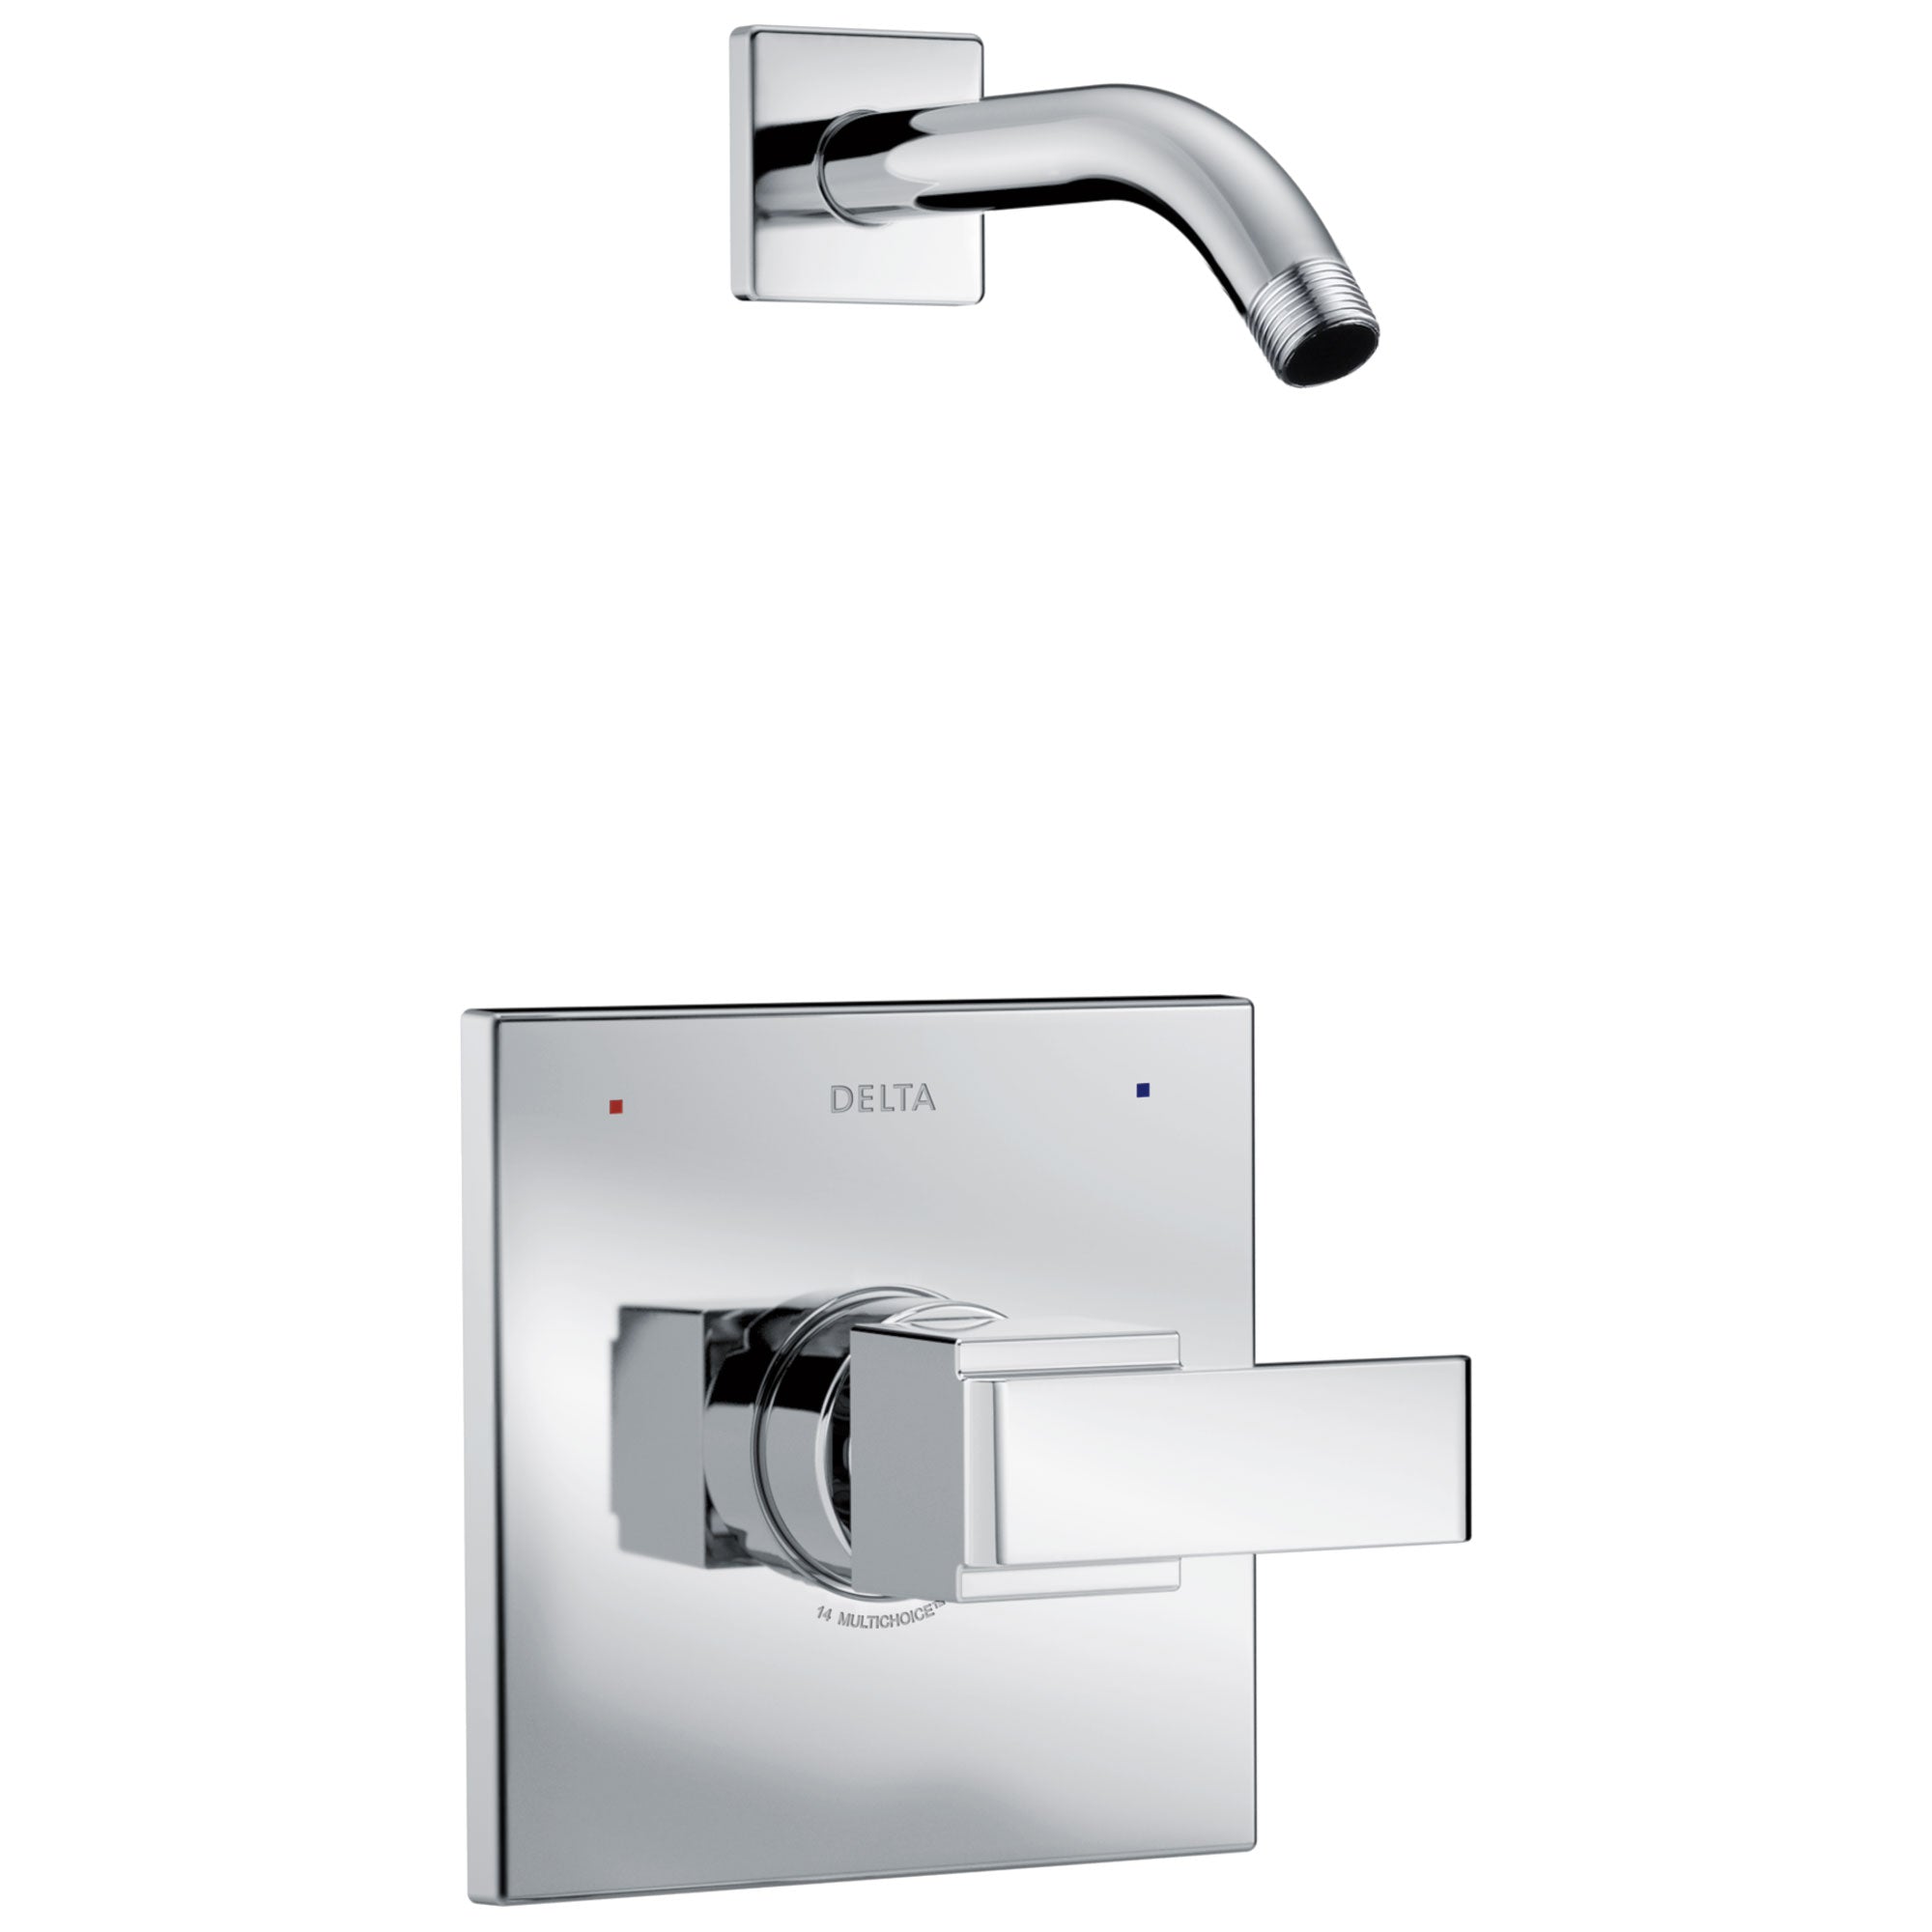 Delta Ara 1-Handle Shower Faucet Trim Kit in Chrome with Less Showerhead Includes Rough-in Valve without Stops D2560V